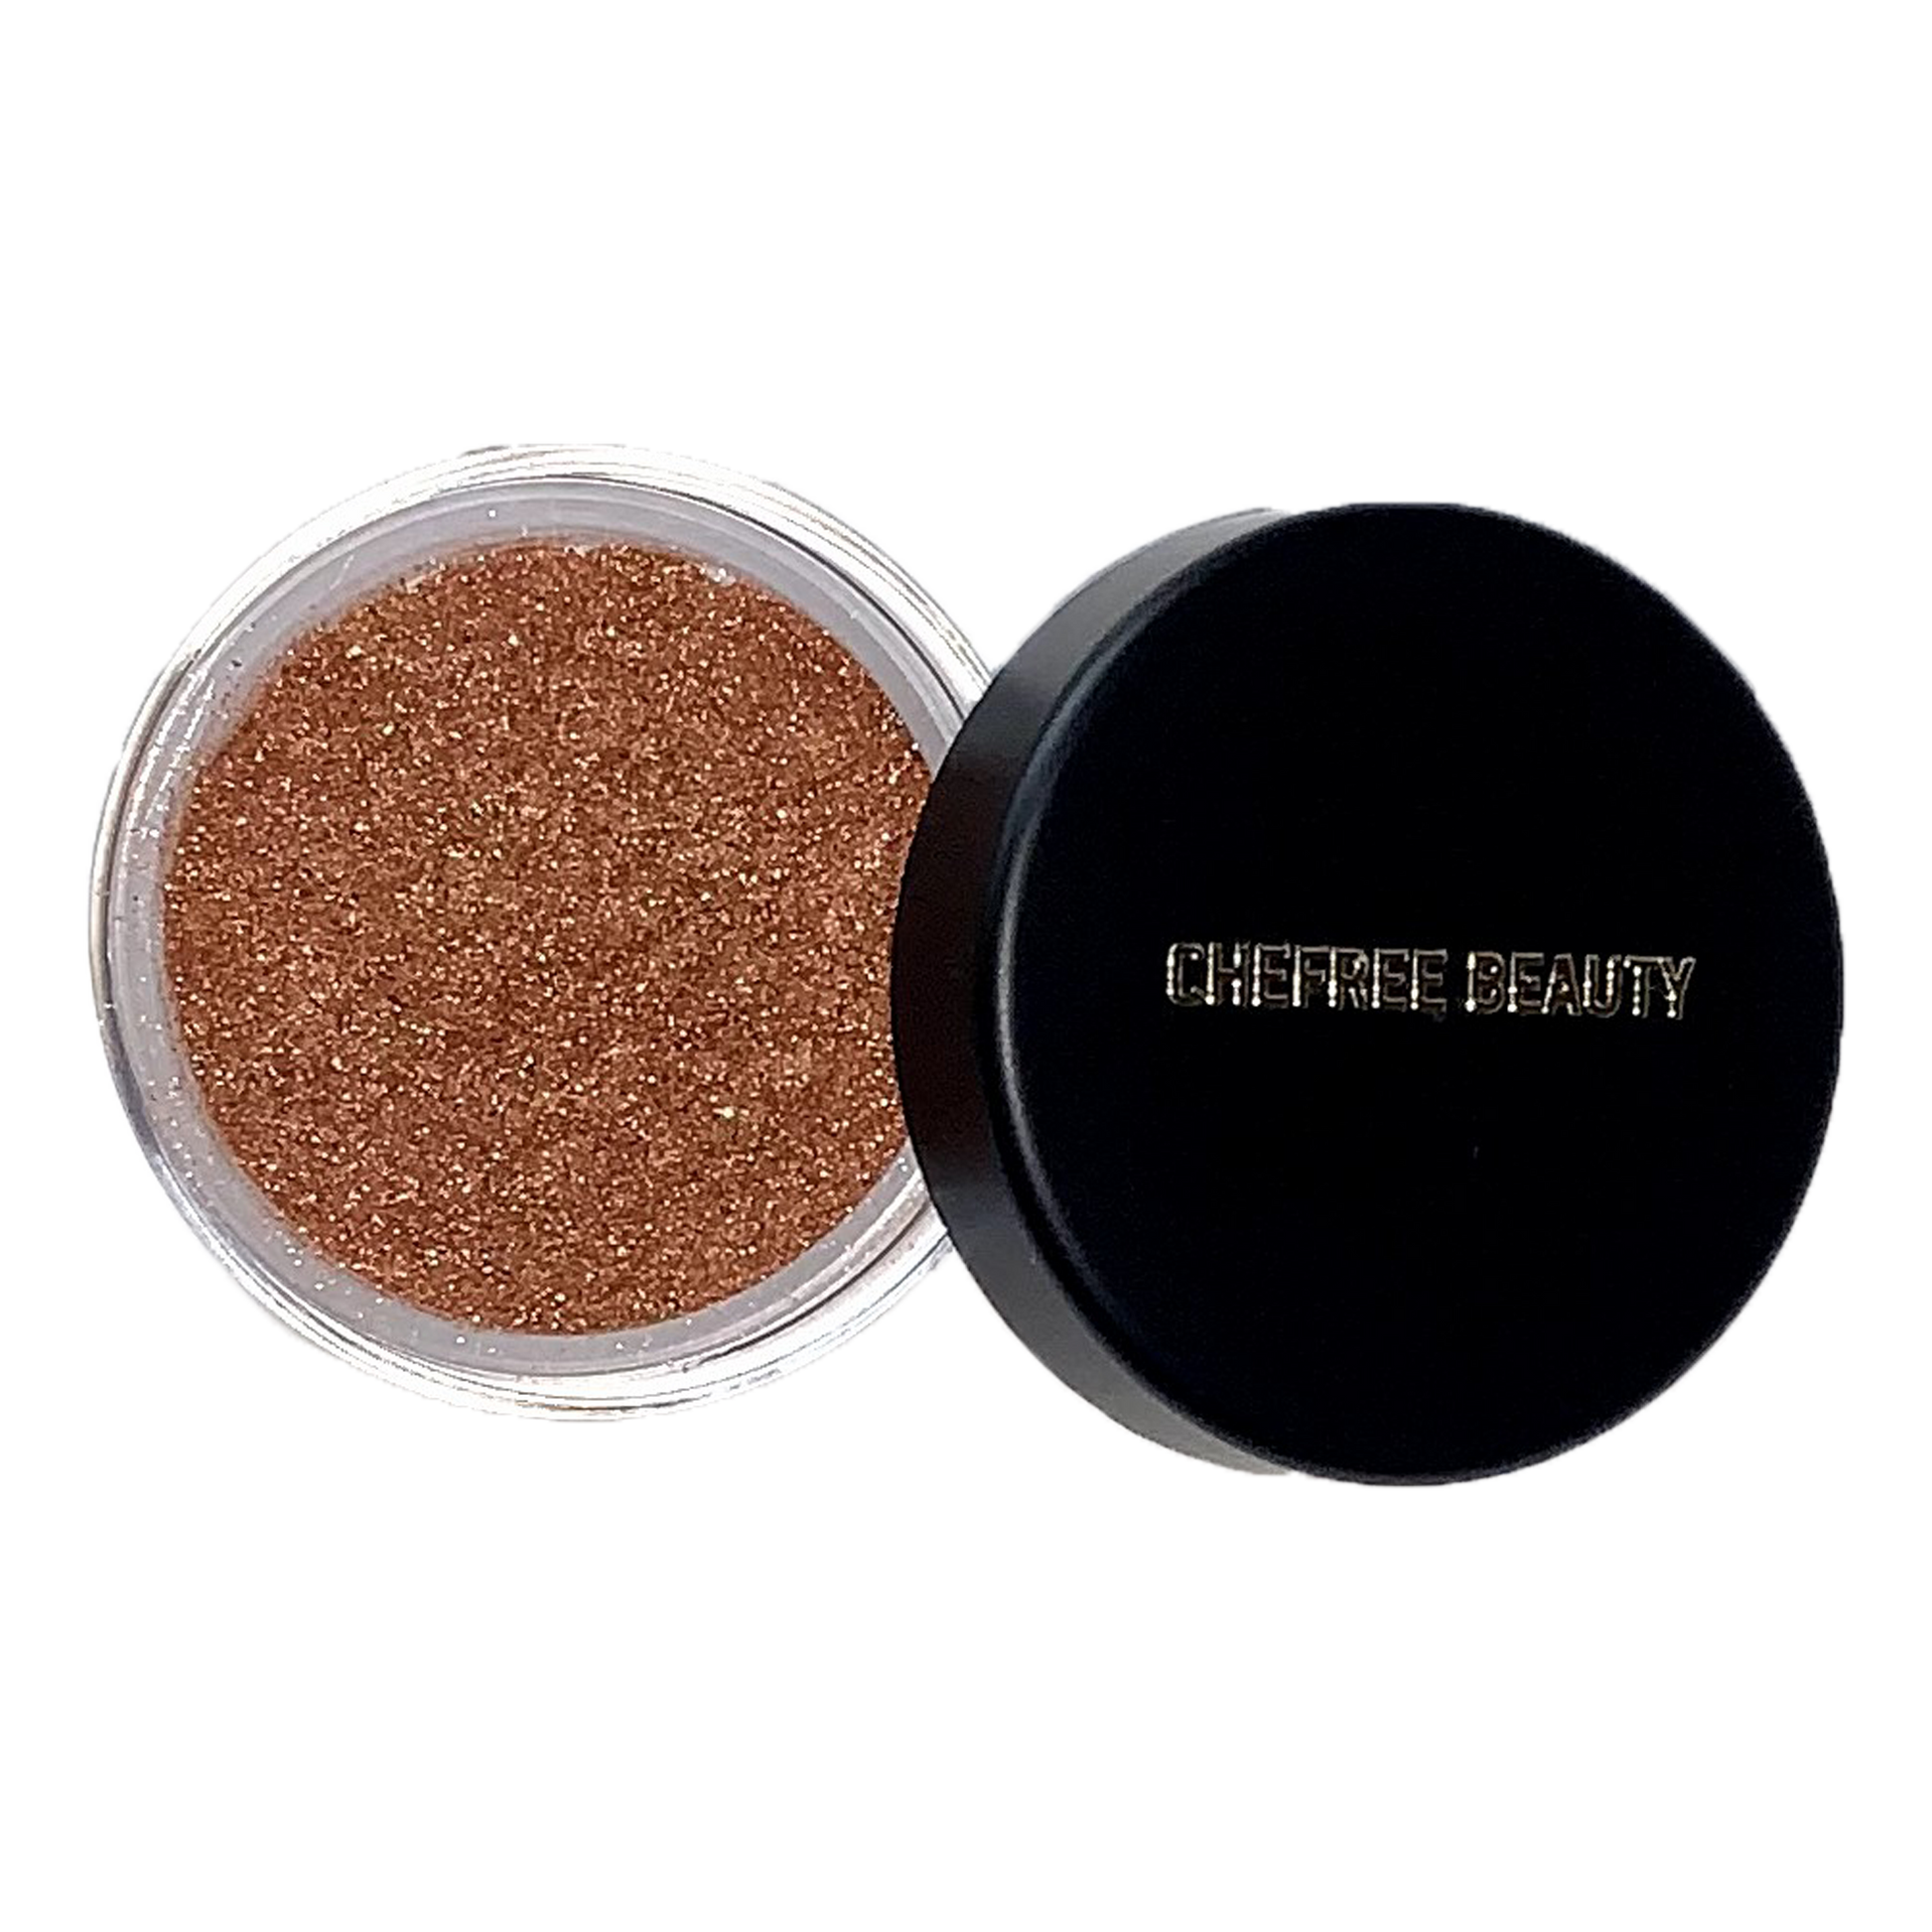 BRONZED highlighter - CHEFREE BEAUTY